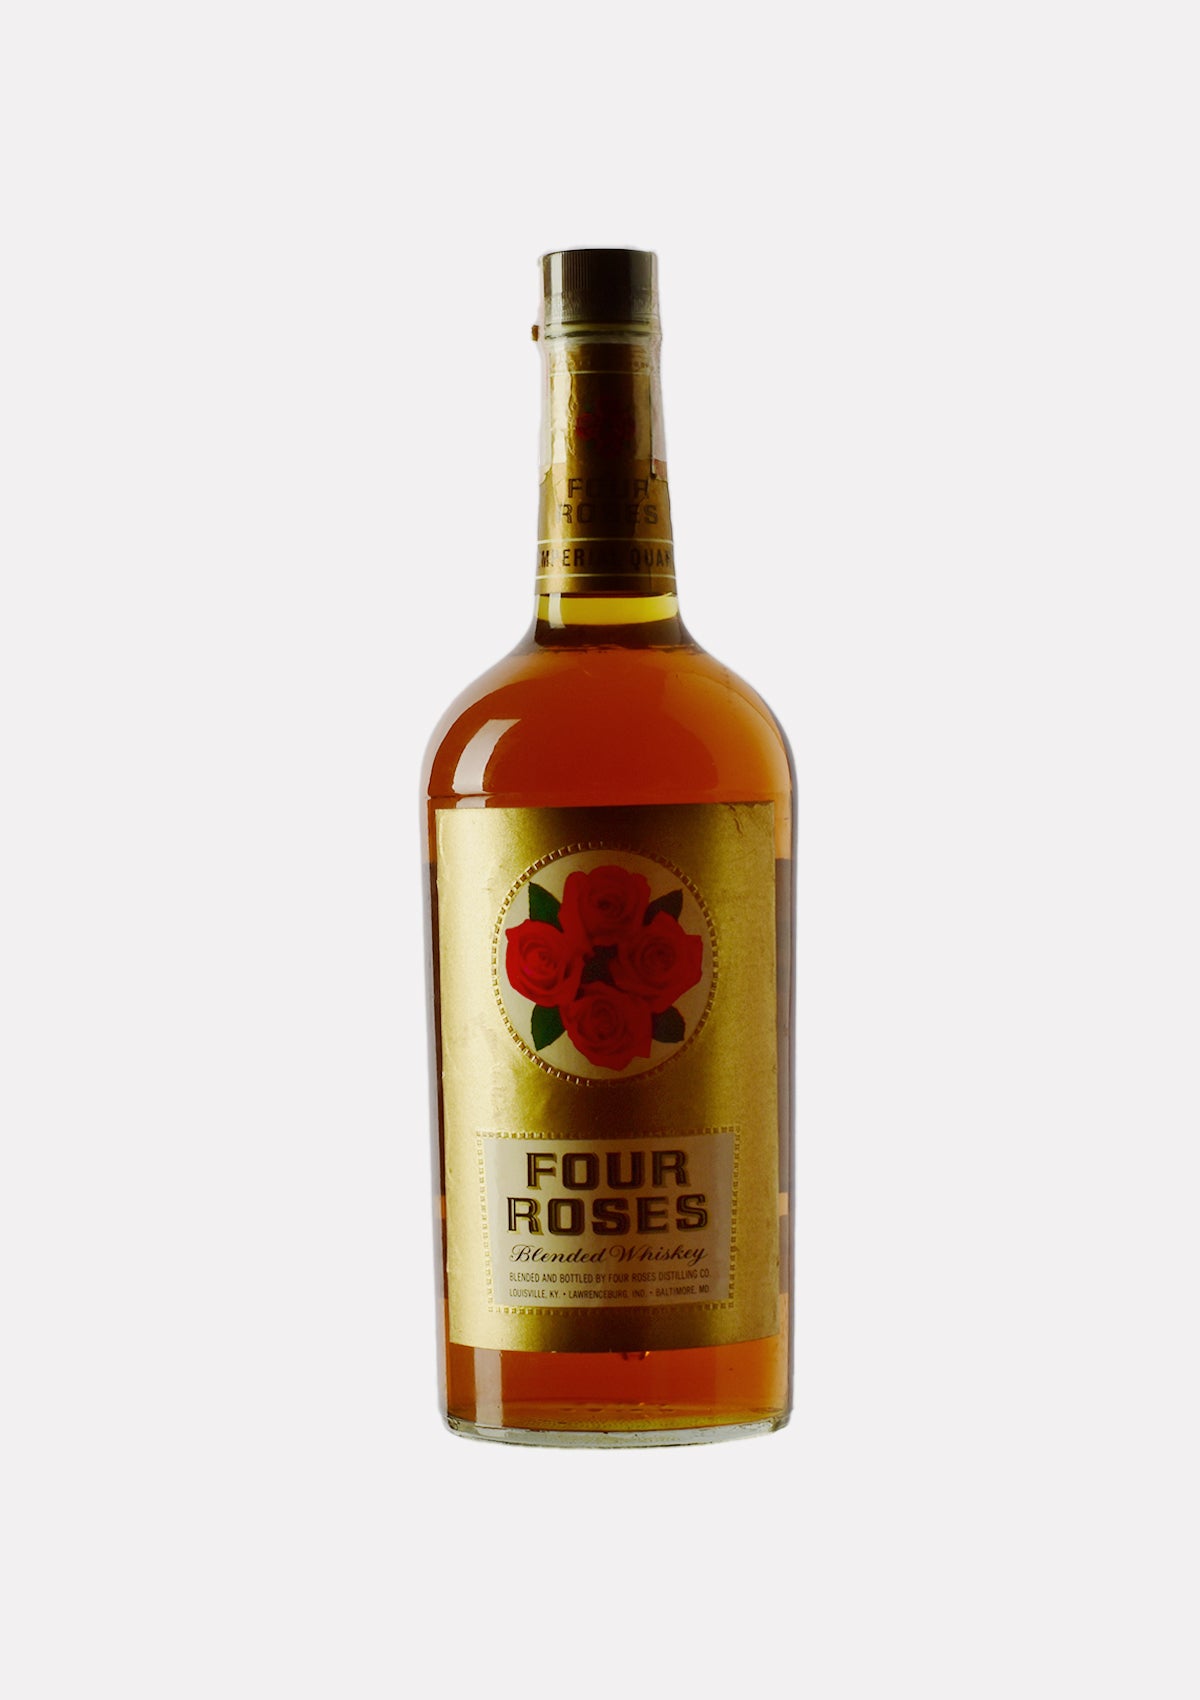 Four Roses Premium American Whiskey A Blend